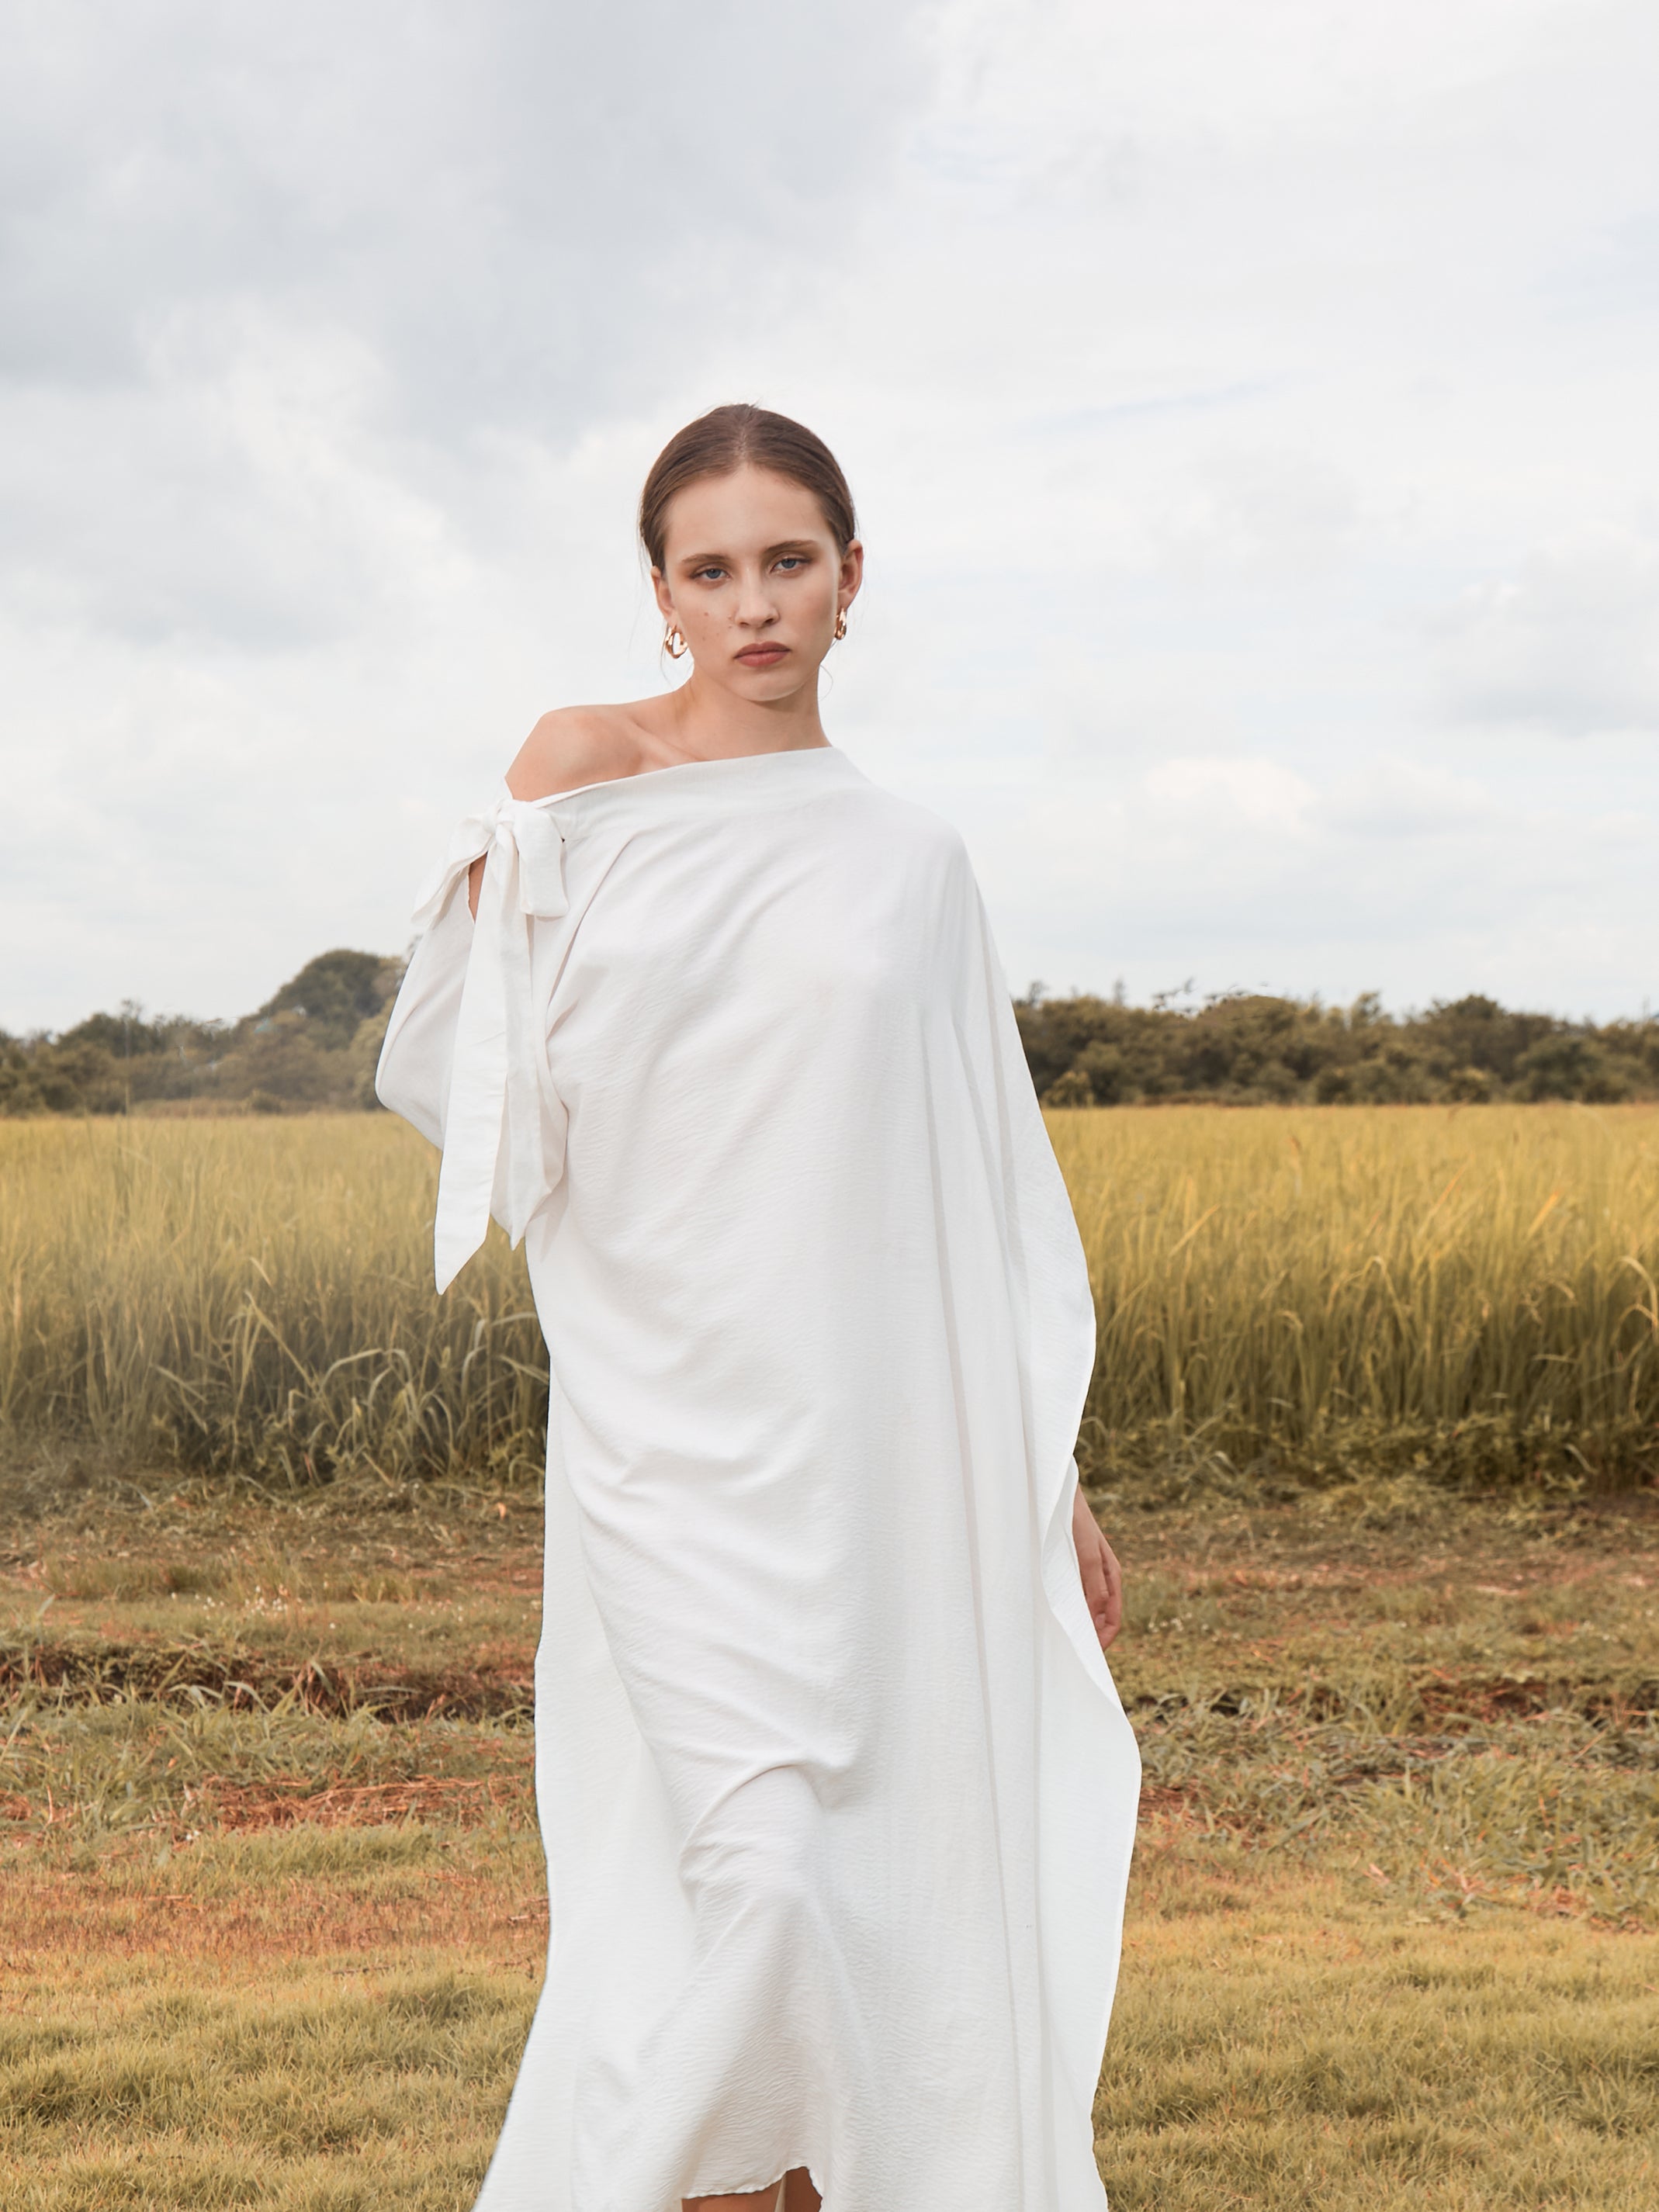 Shop White Kaftan Dress in limitless comfort and elegance with our Goddess Kaftan Maxi Dress. With a flowy skirt and a V neck, this modal maxi dress is the perfect vacation wear.